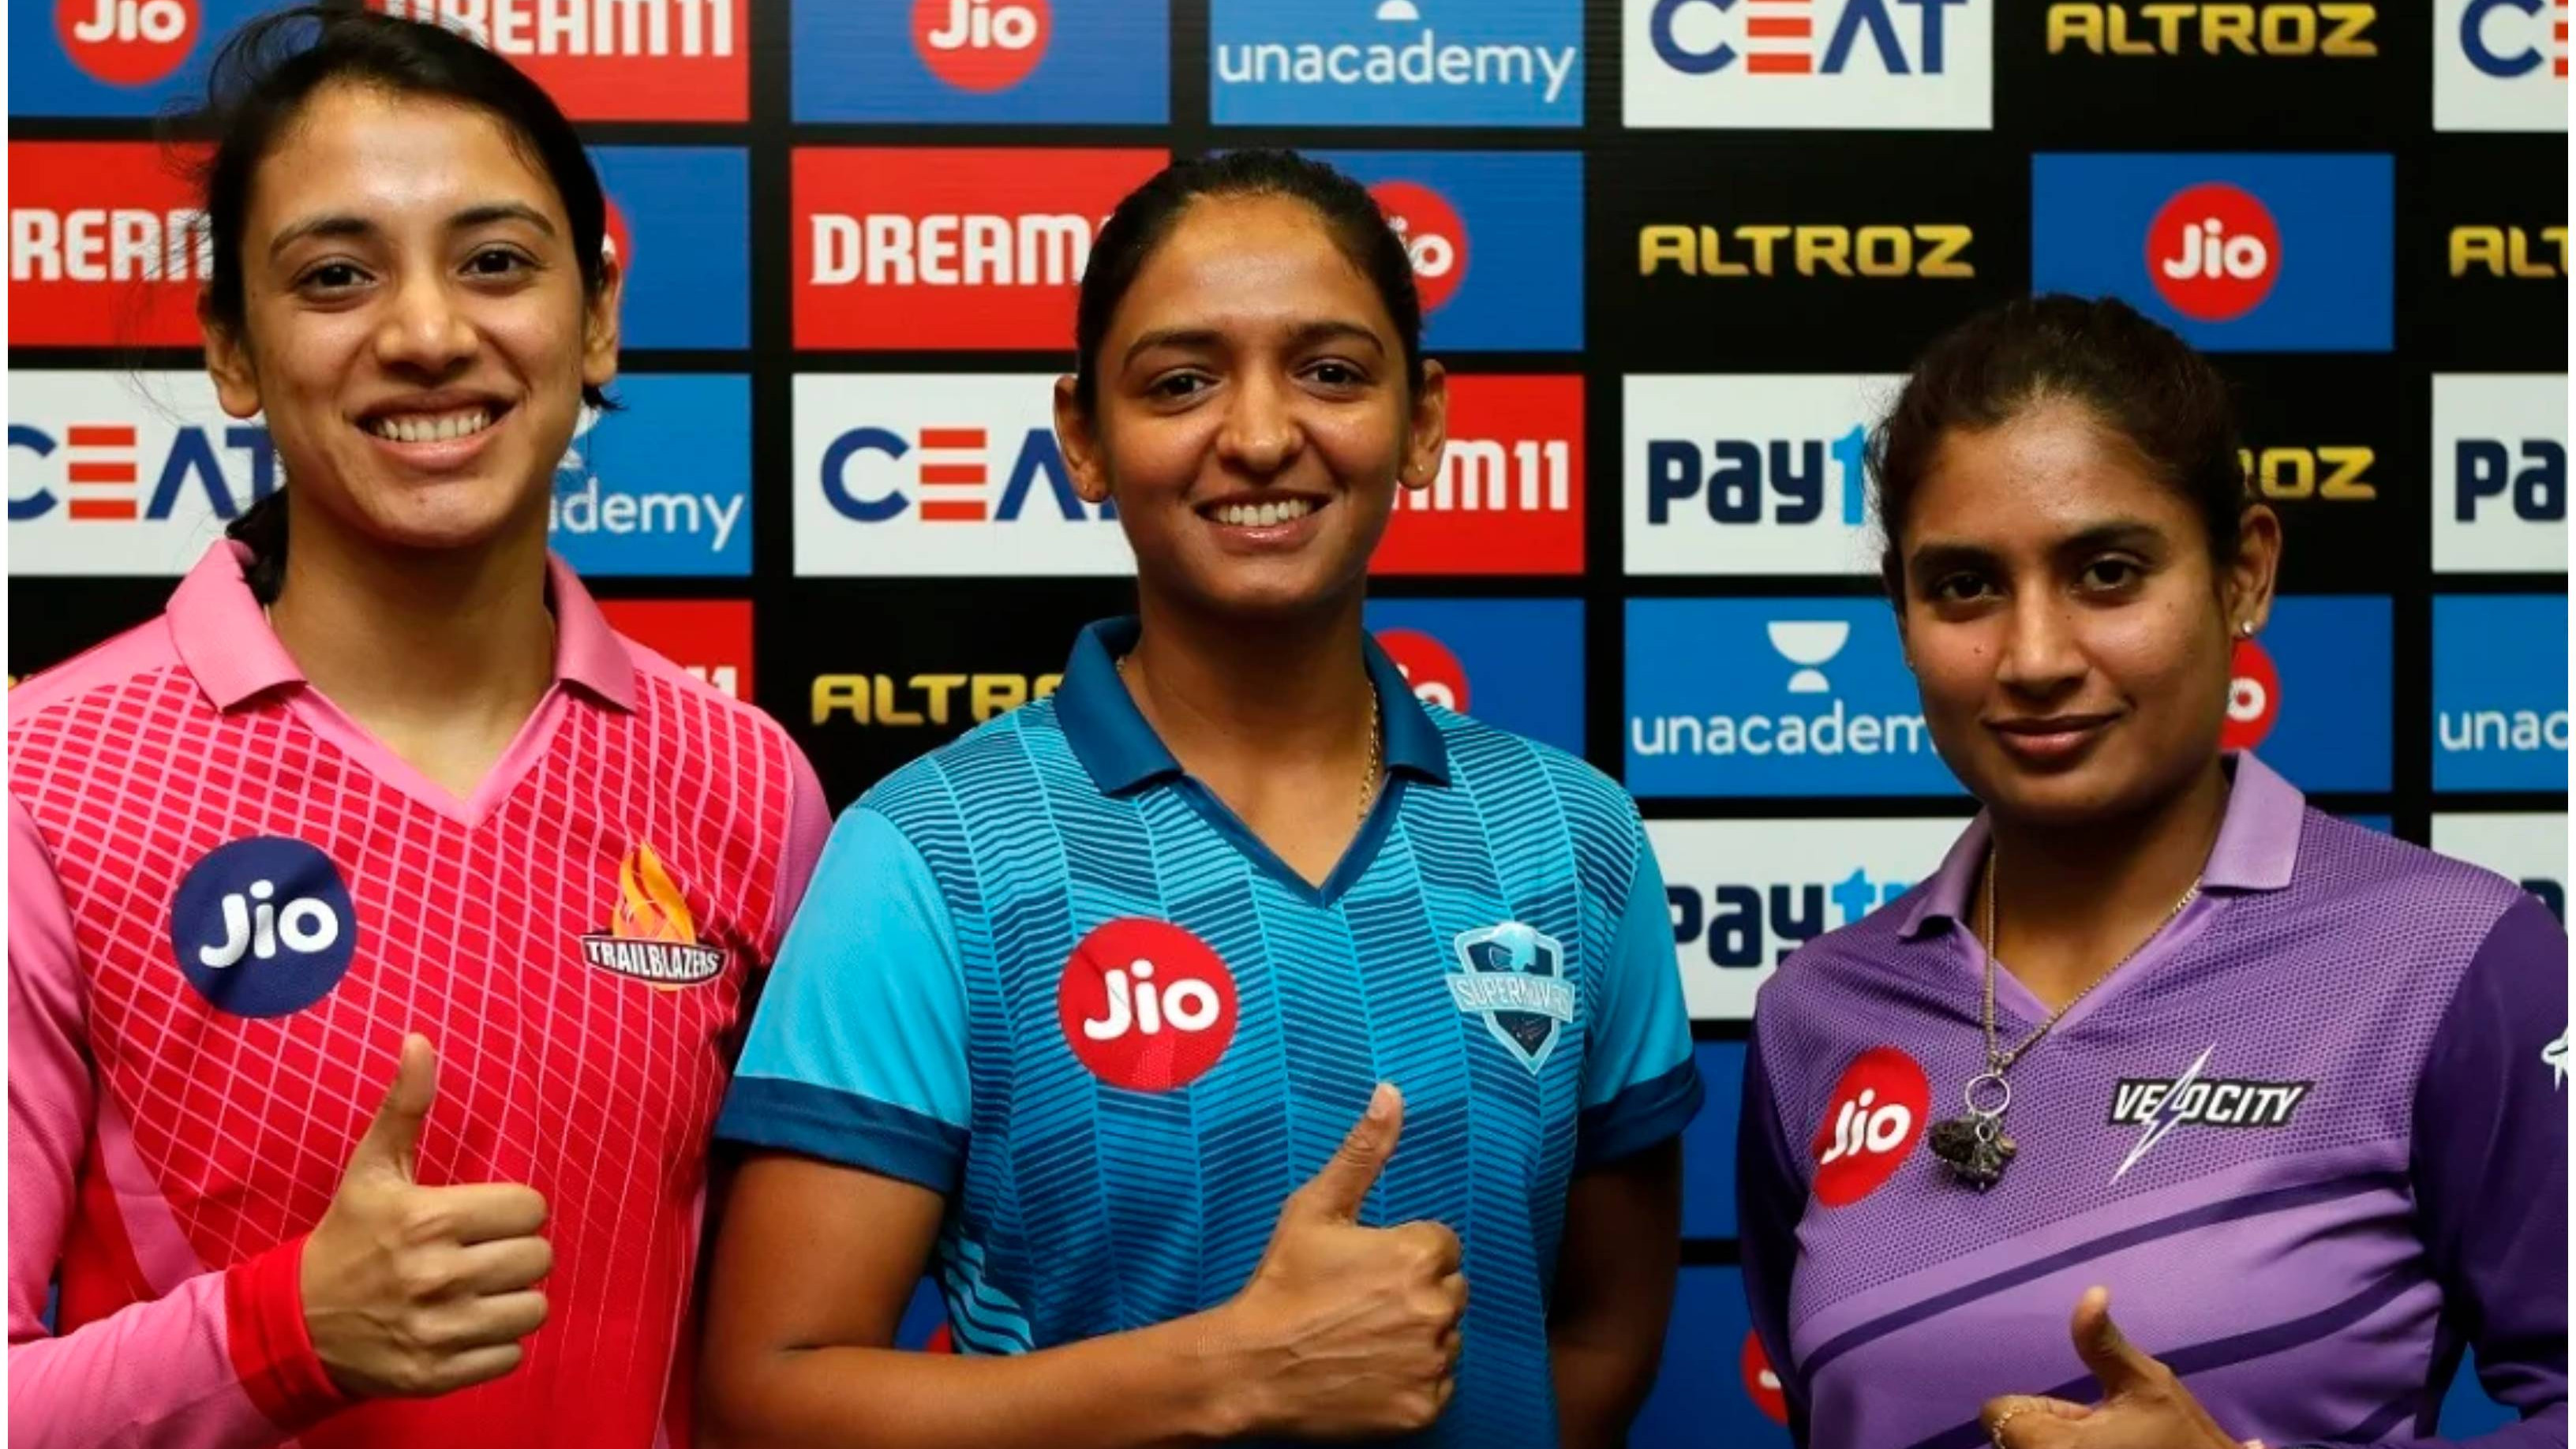 WIPL 2023: Eight IPL franchises show interest in owning teams for Women’s IPL – Report